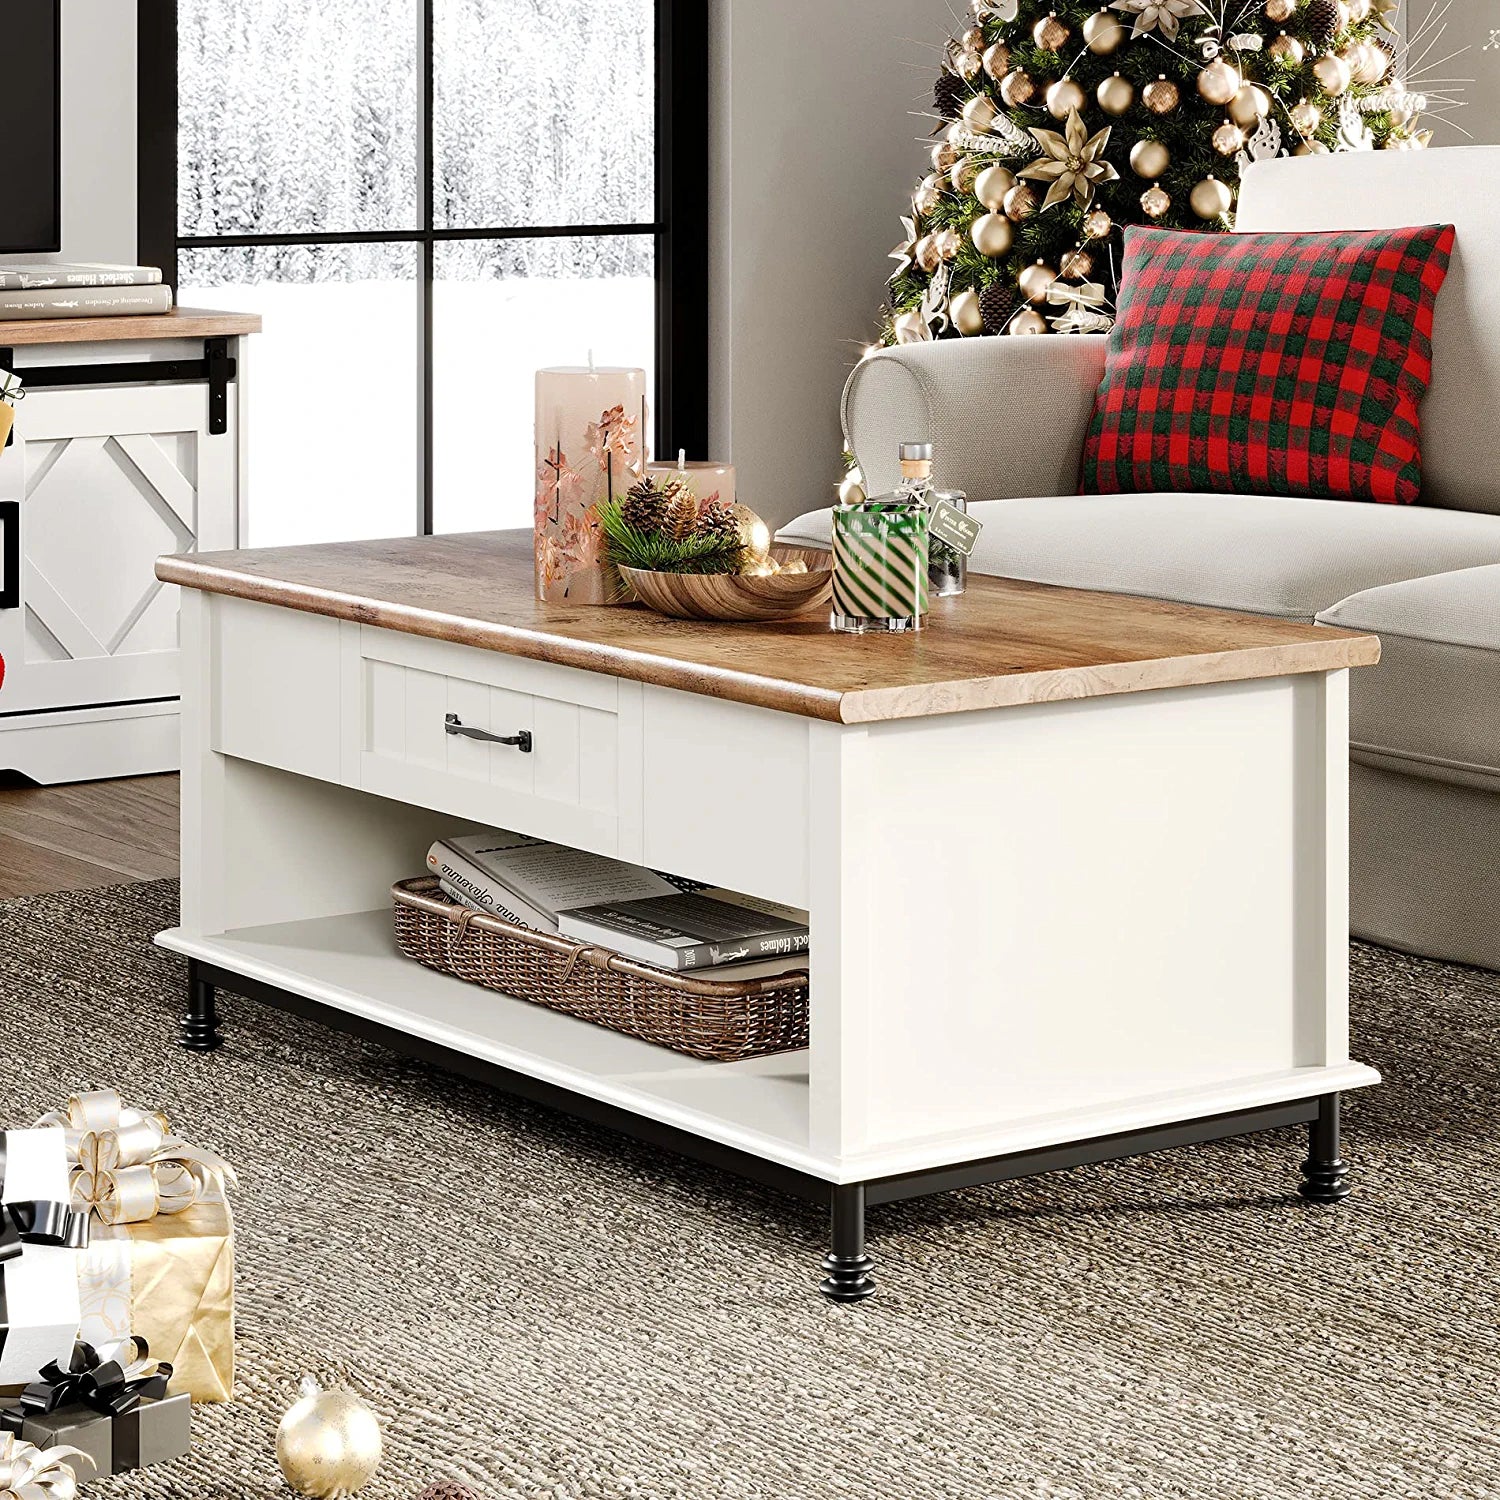 WAMPAT 42" Farmhouse Coffee Table with 1 Drawer & Open Storage Shelf for Living Room, White